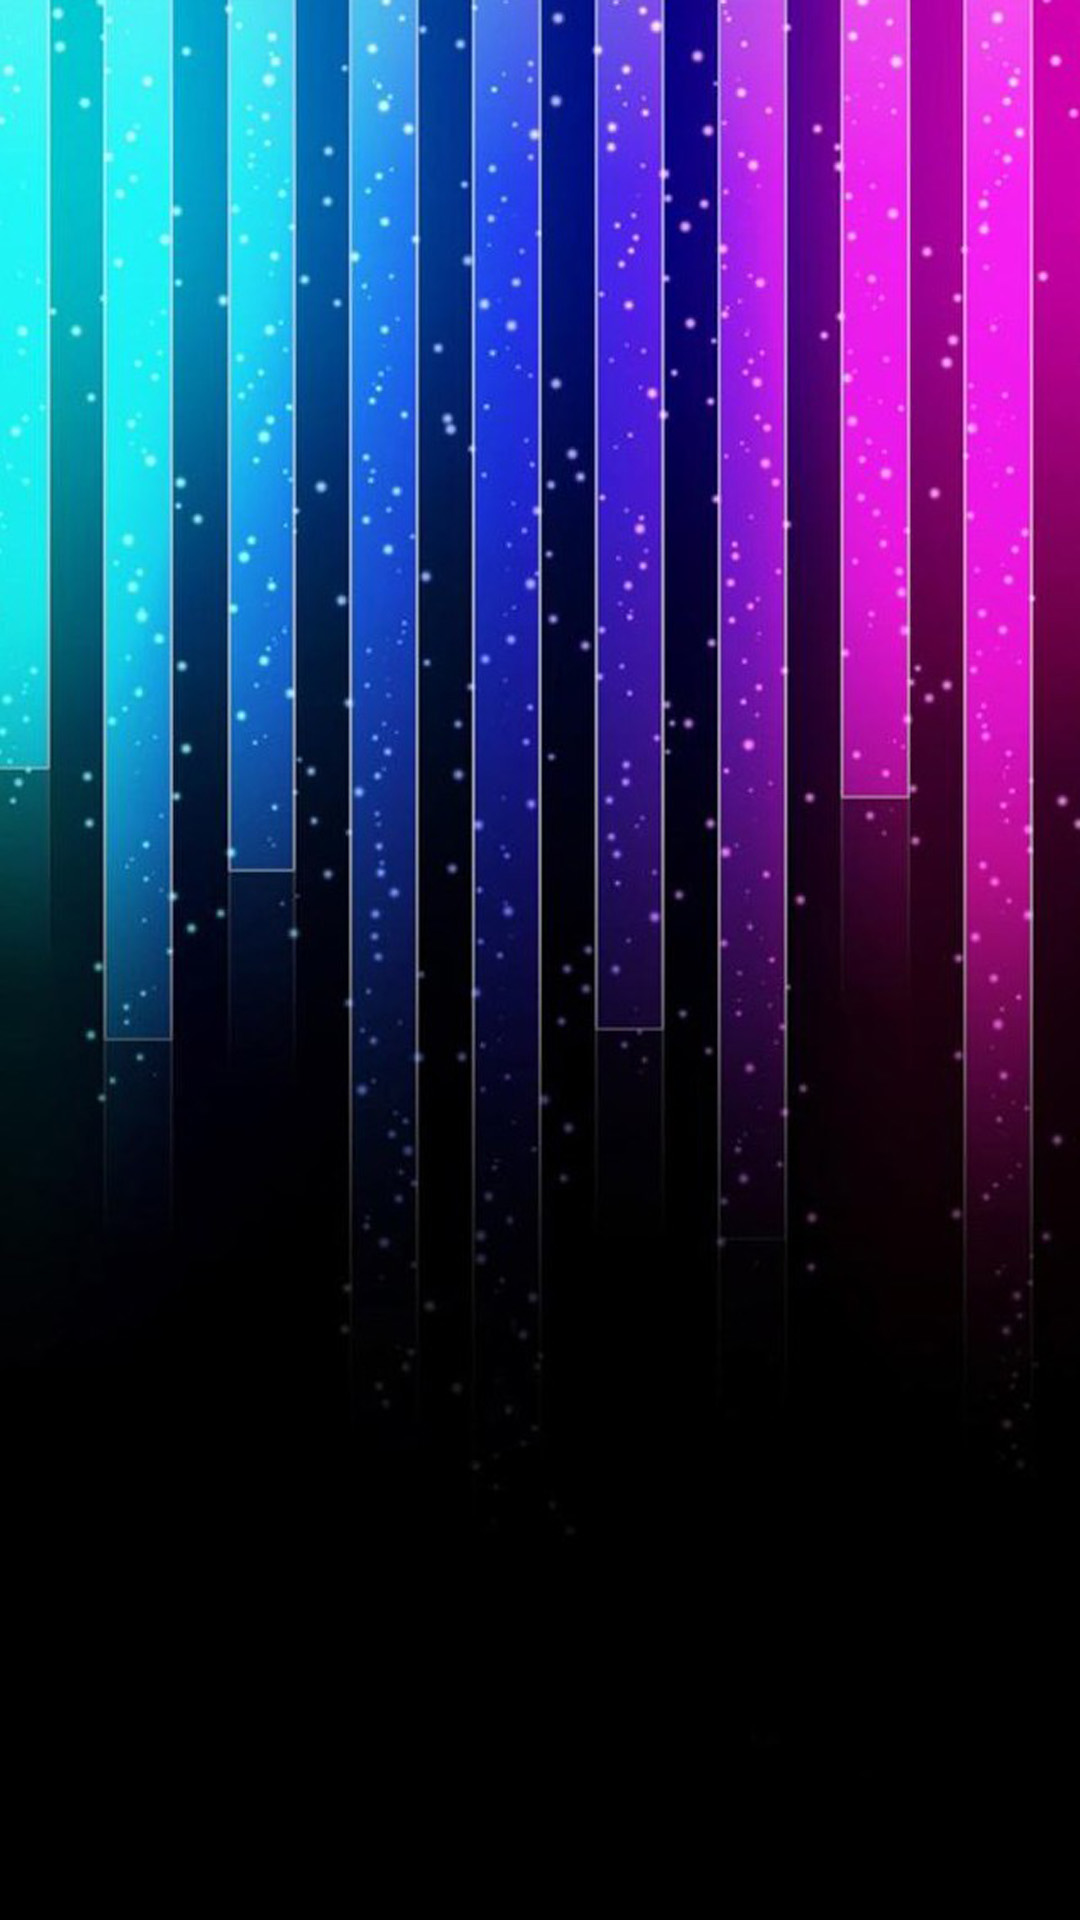 hd music wallpapers for android,blue,violet,text,purple,light